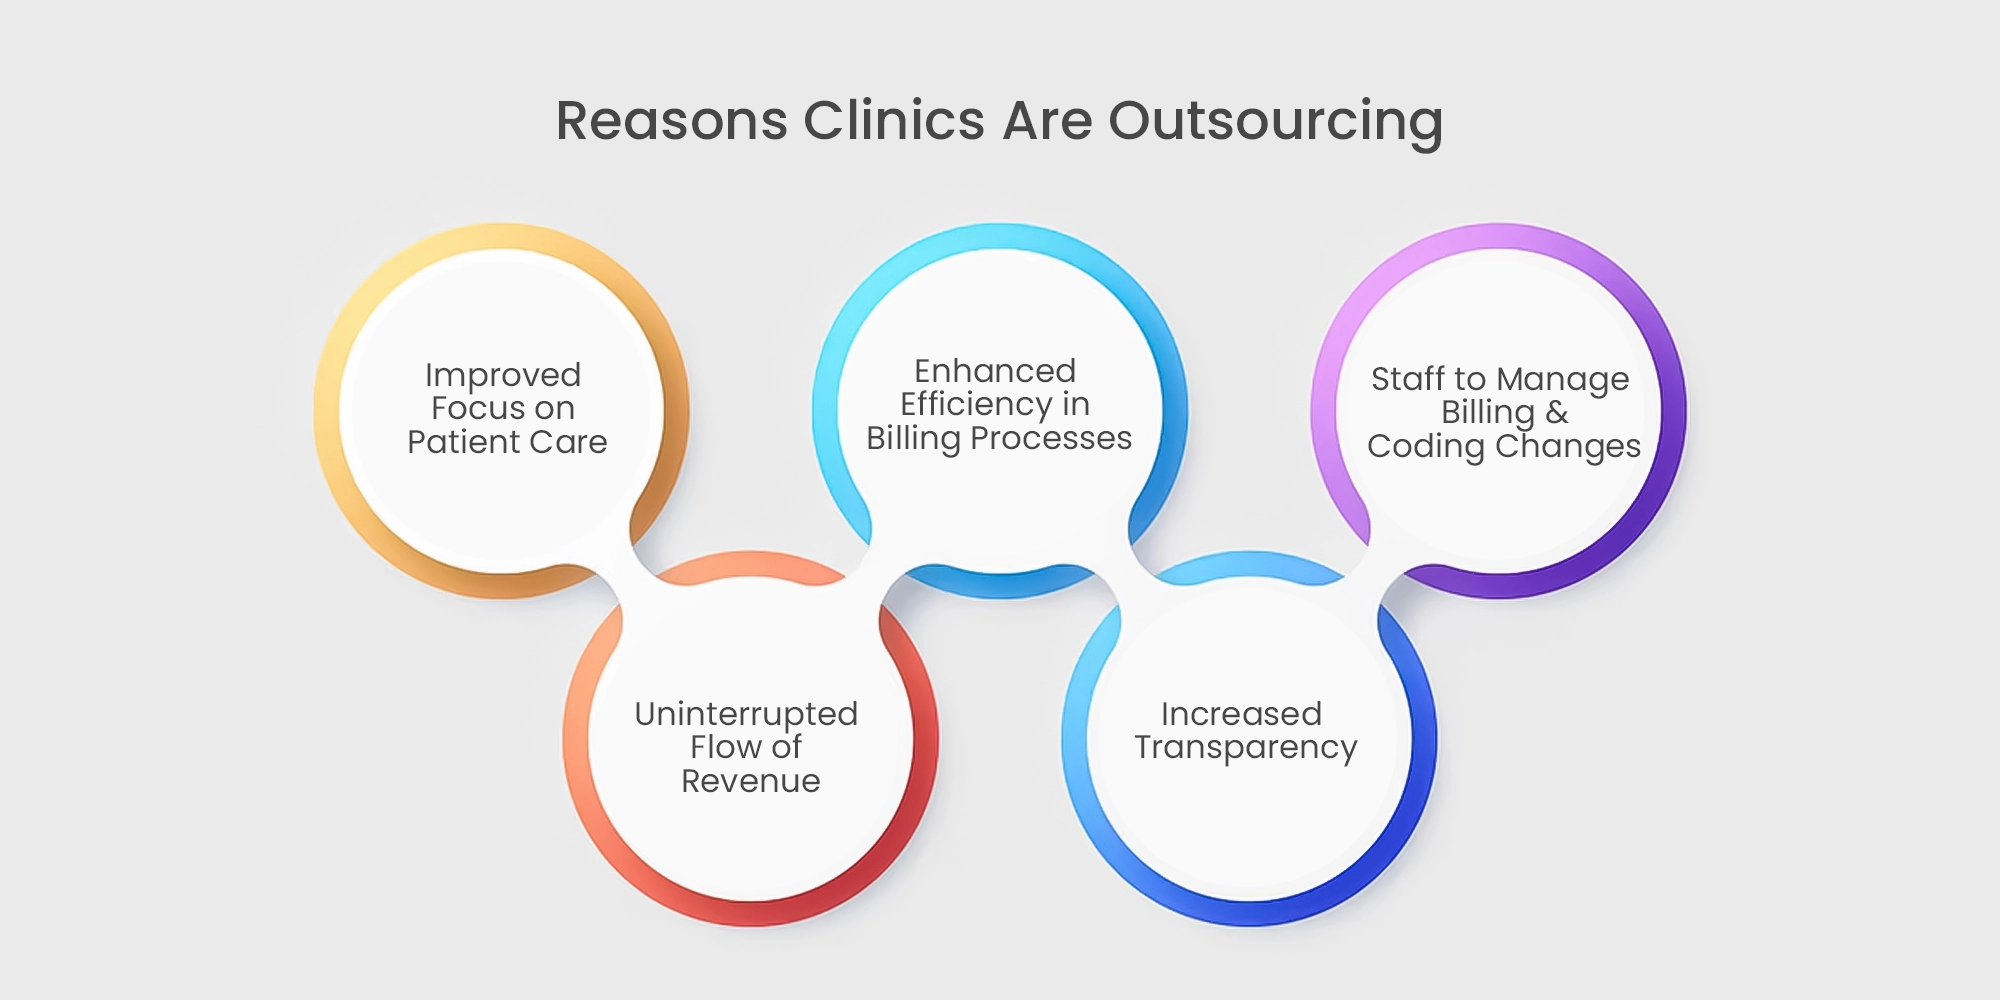 Reasons Clinics Are Outsourcing